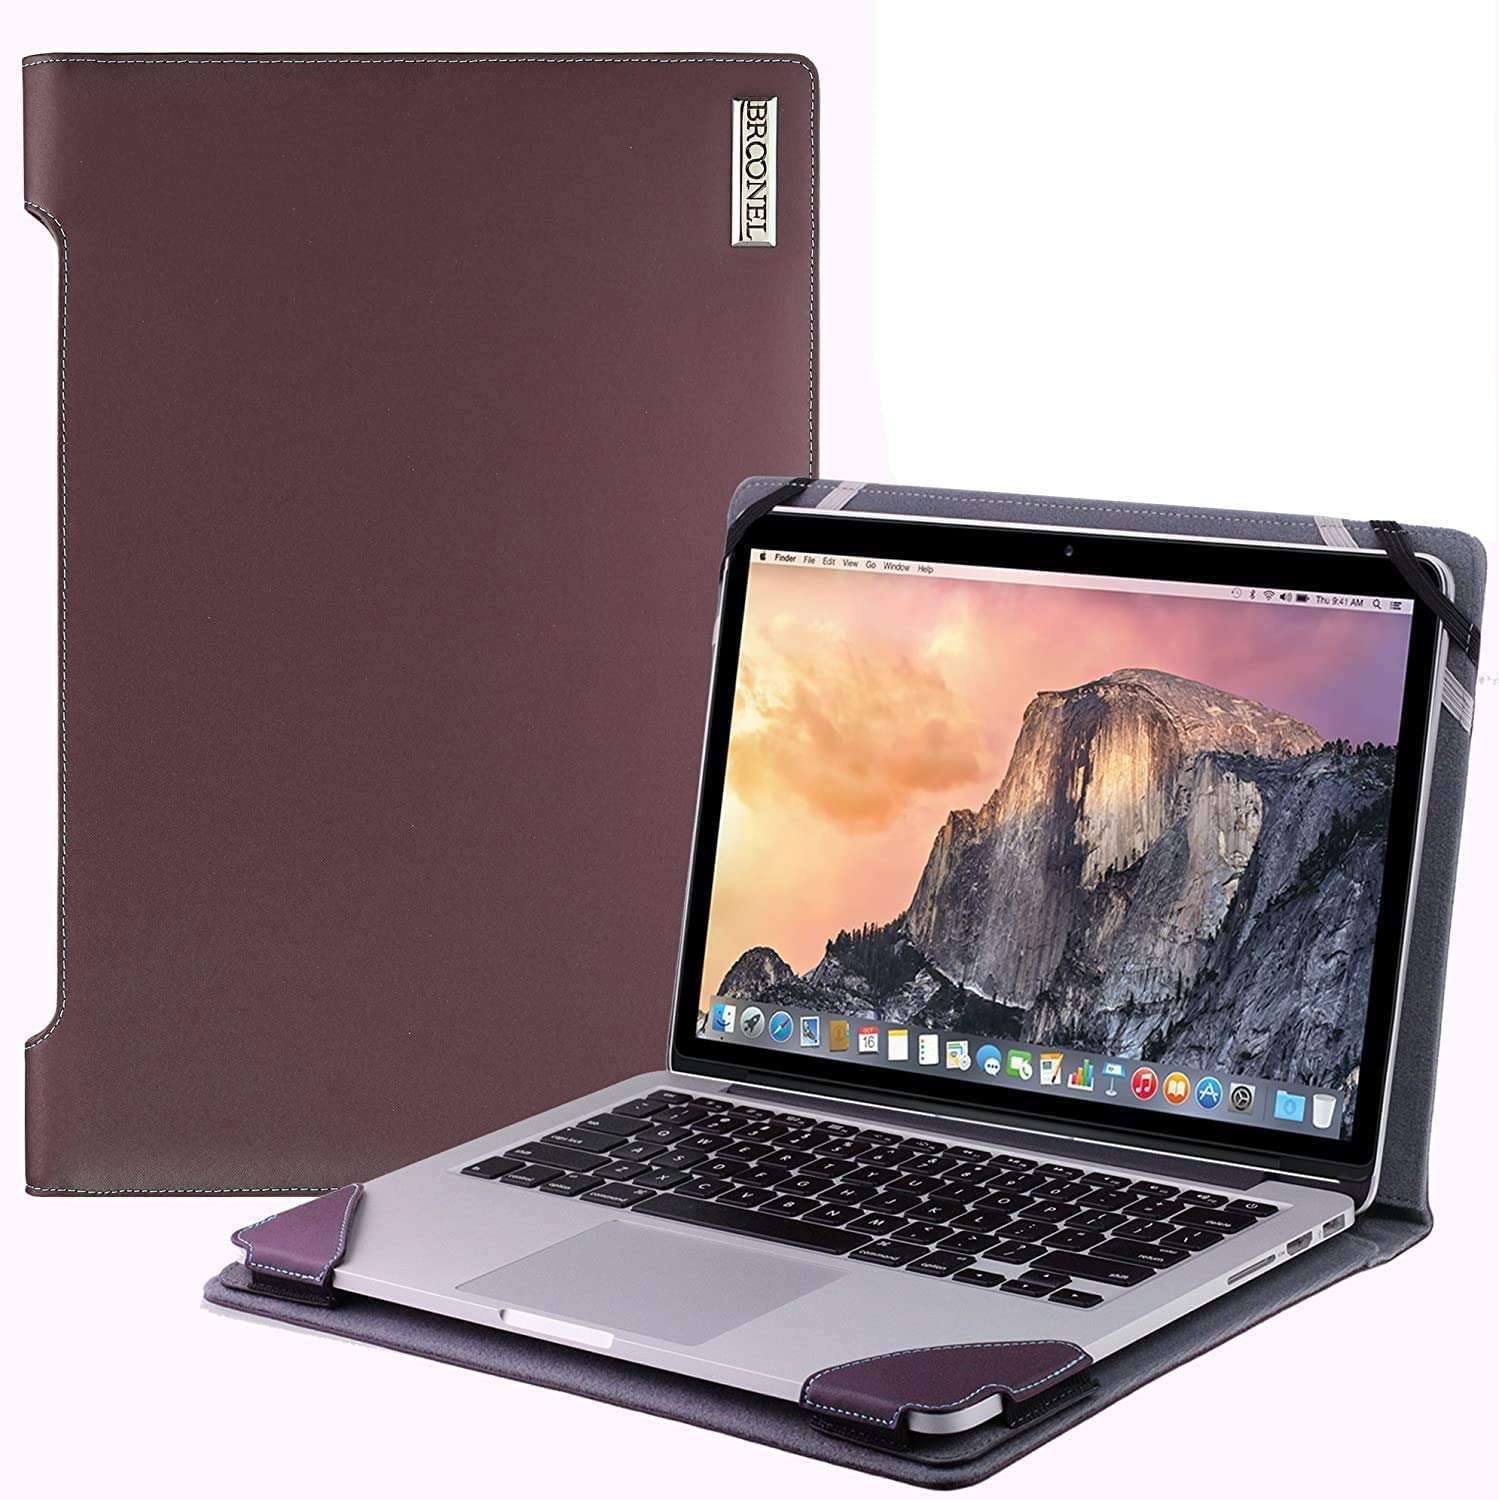 Broonel Purple Case For Acer Aspire Switch 11 Windows 8.1 convertible notebook